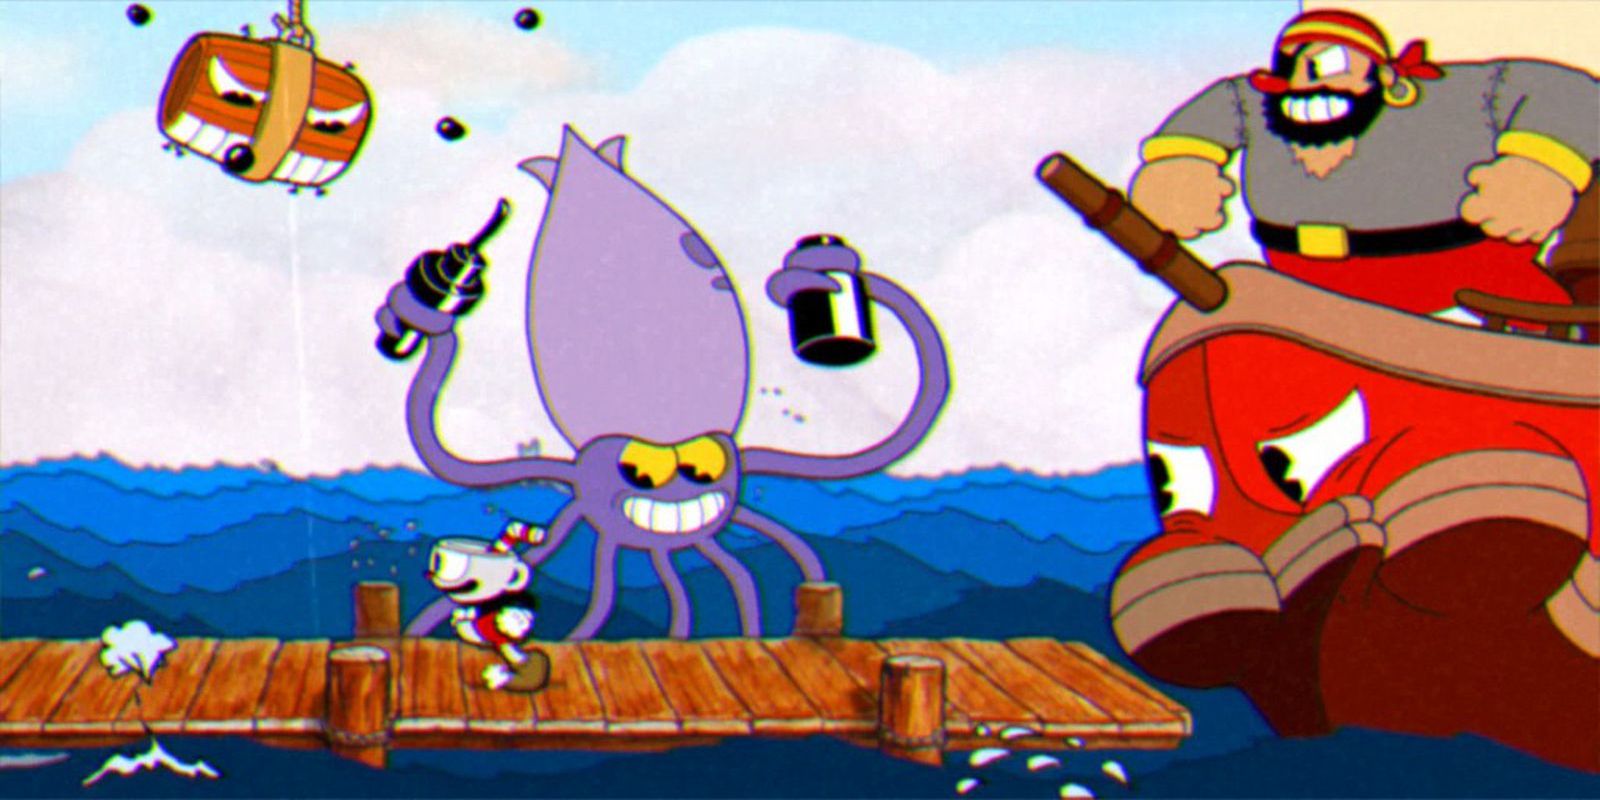 Gameplay of the 2018 video game Cuphead.